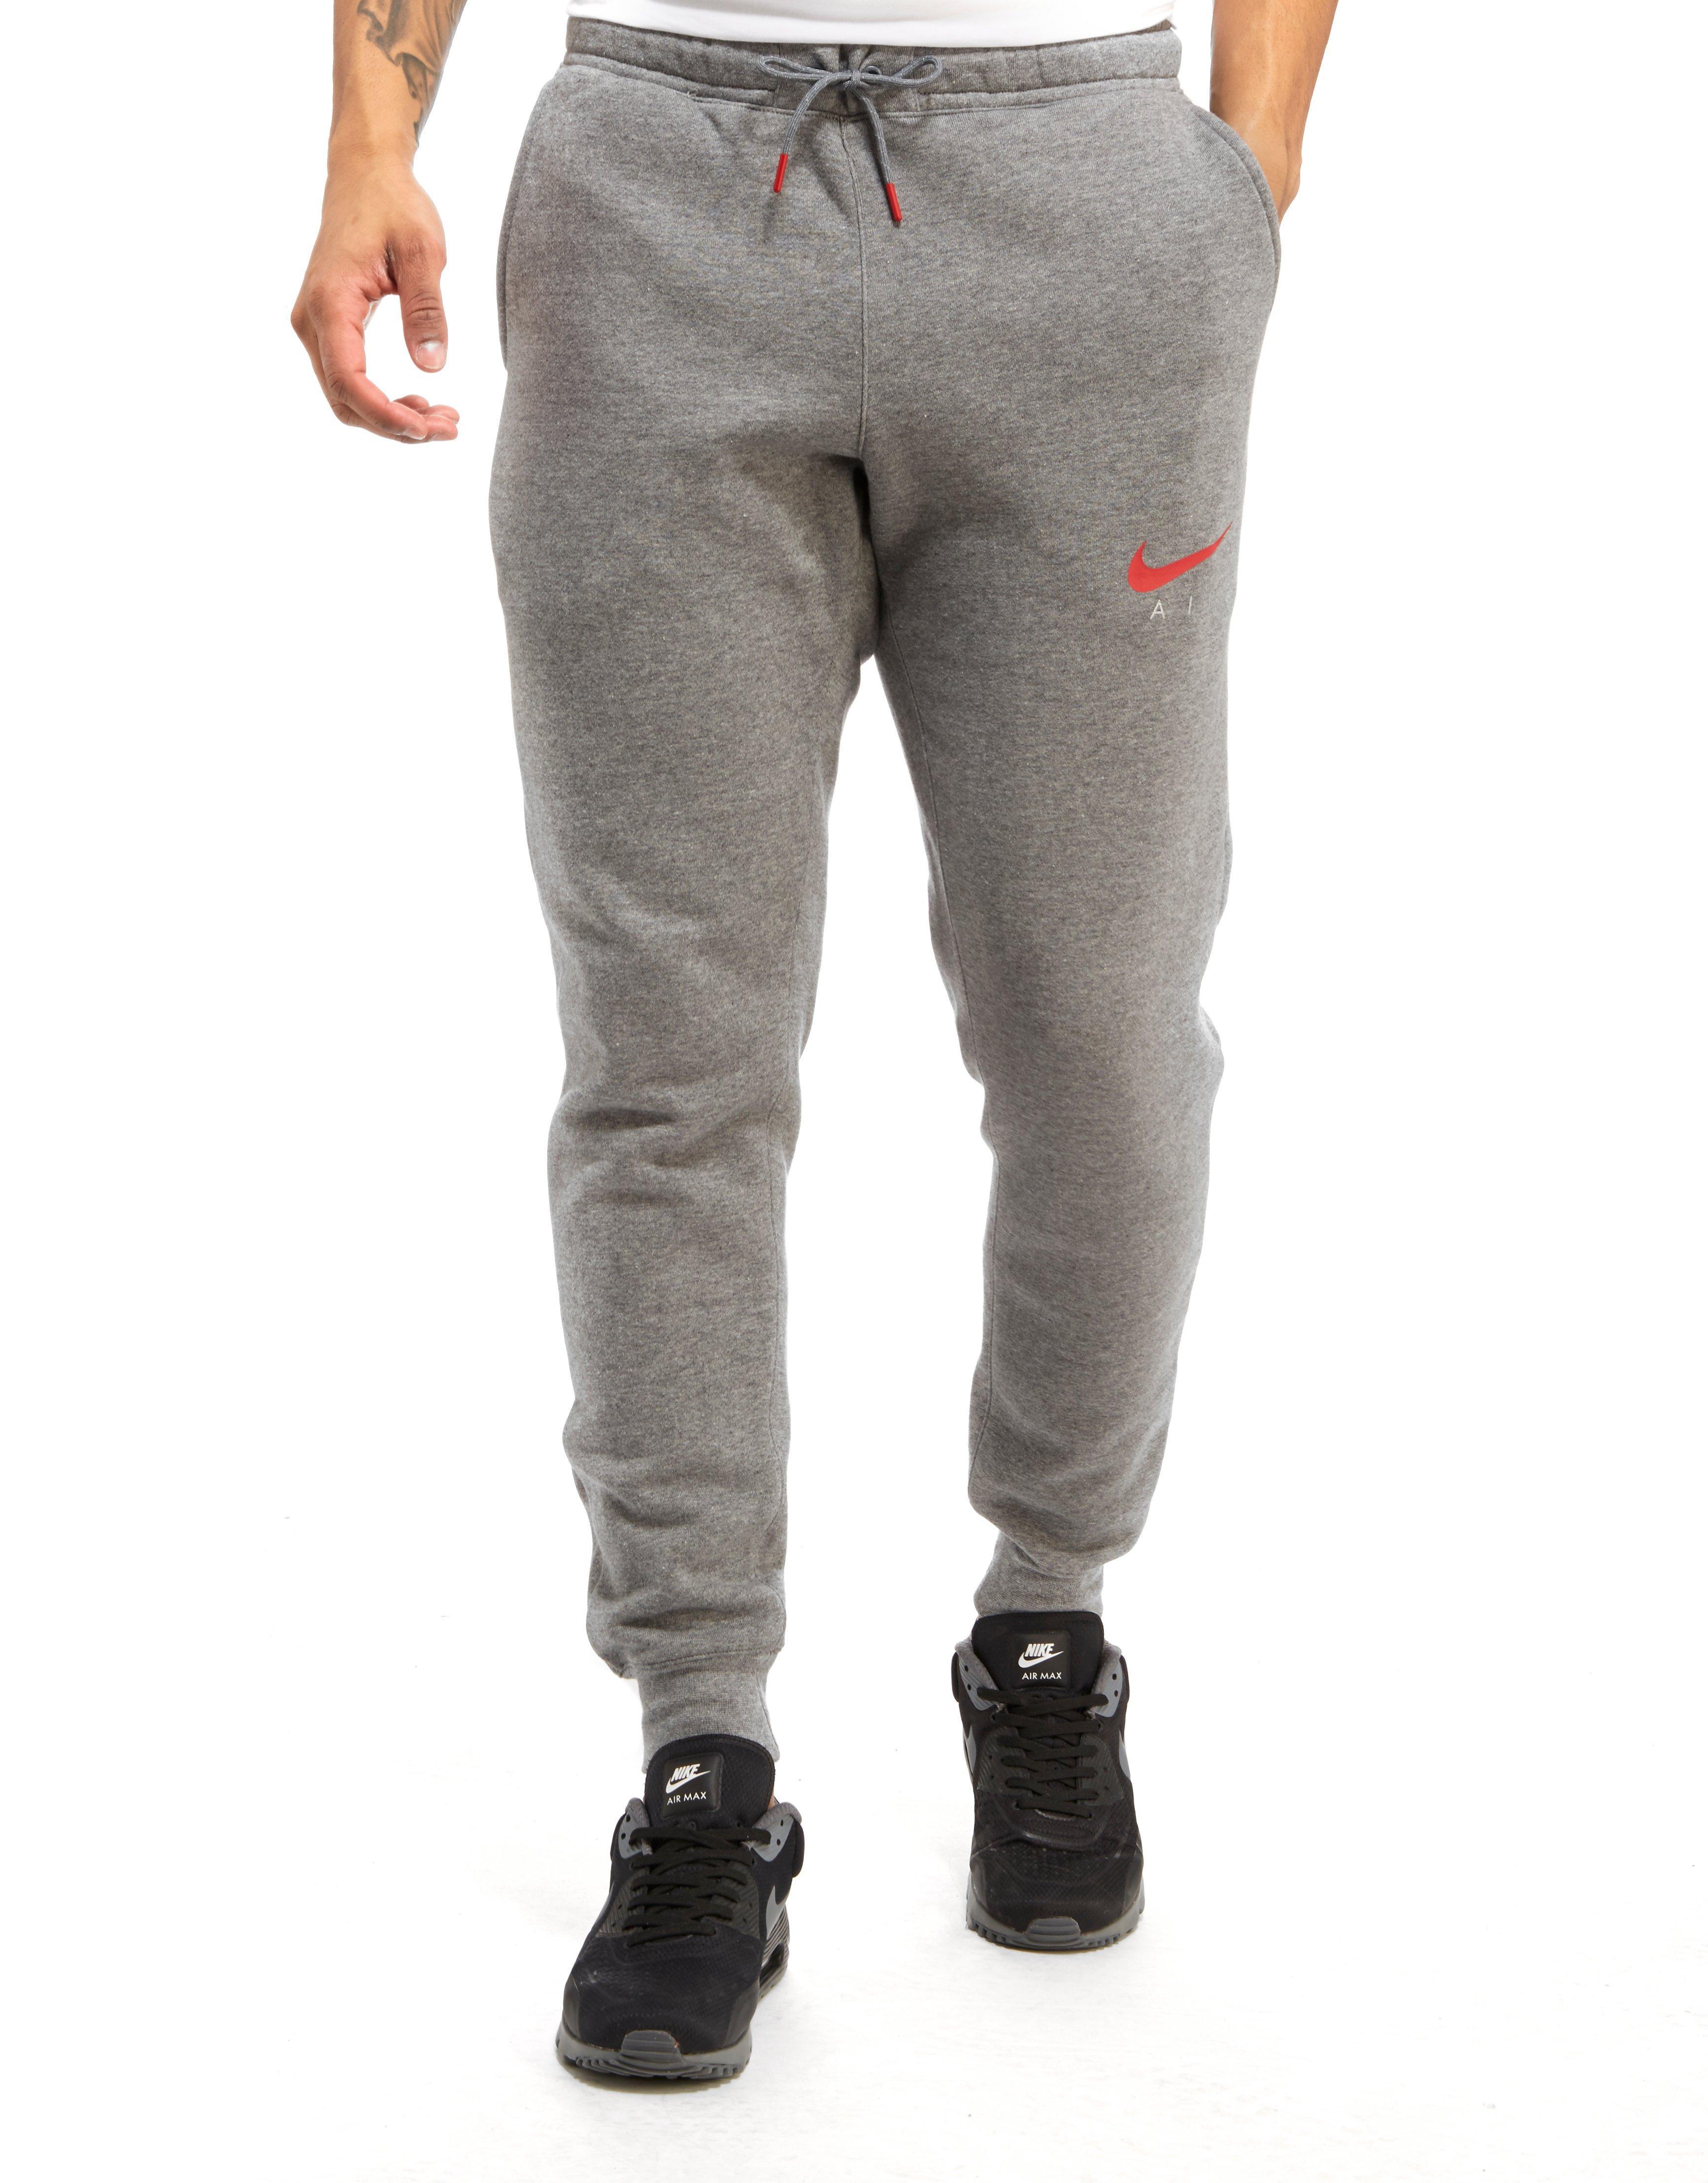 red nike jogging pants where to buy 